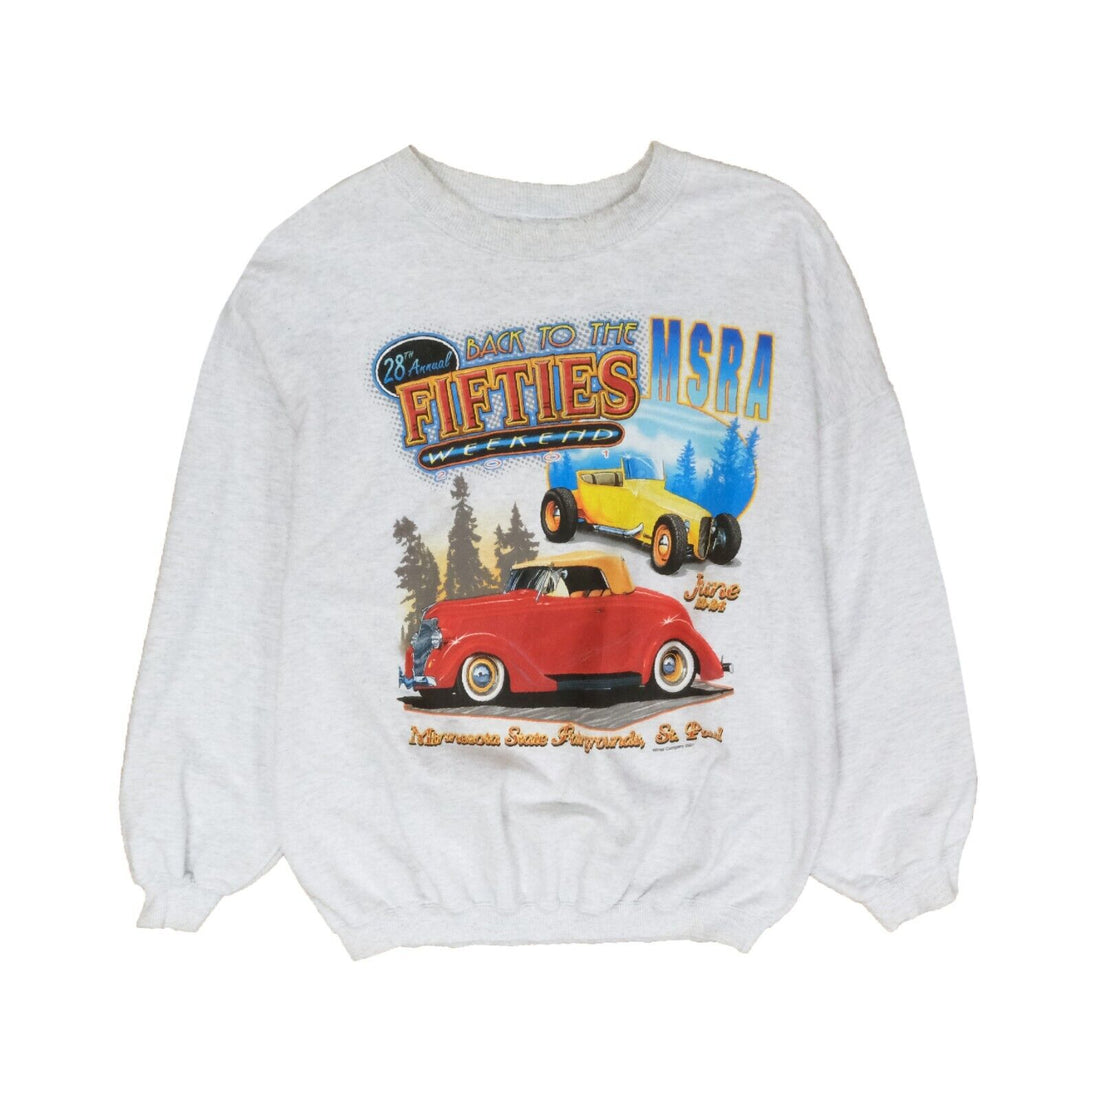 Vintage MSRA Back to The Fifties 28th Annual Car Show Sweatshirt Size XL 2001